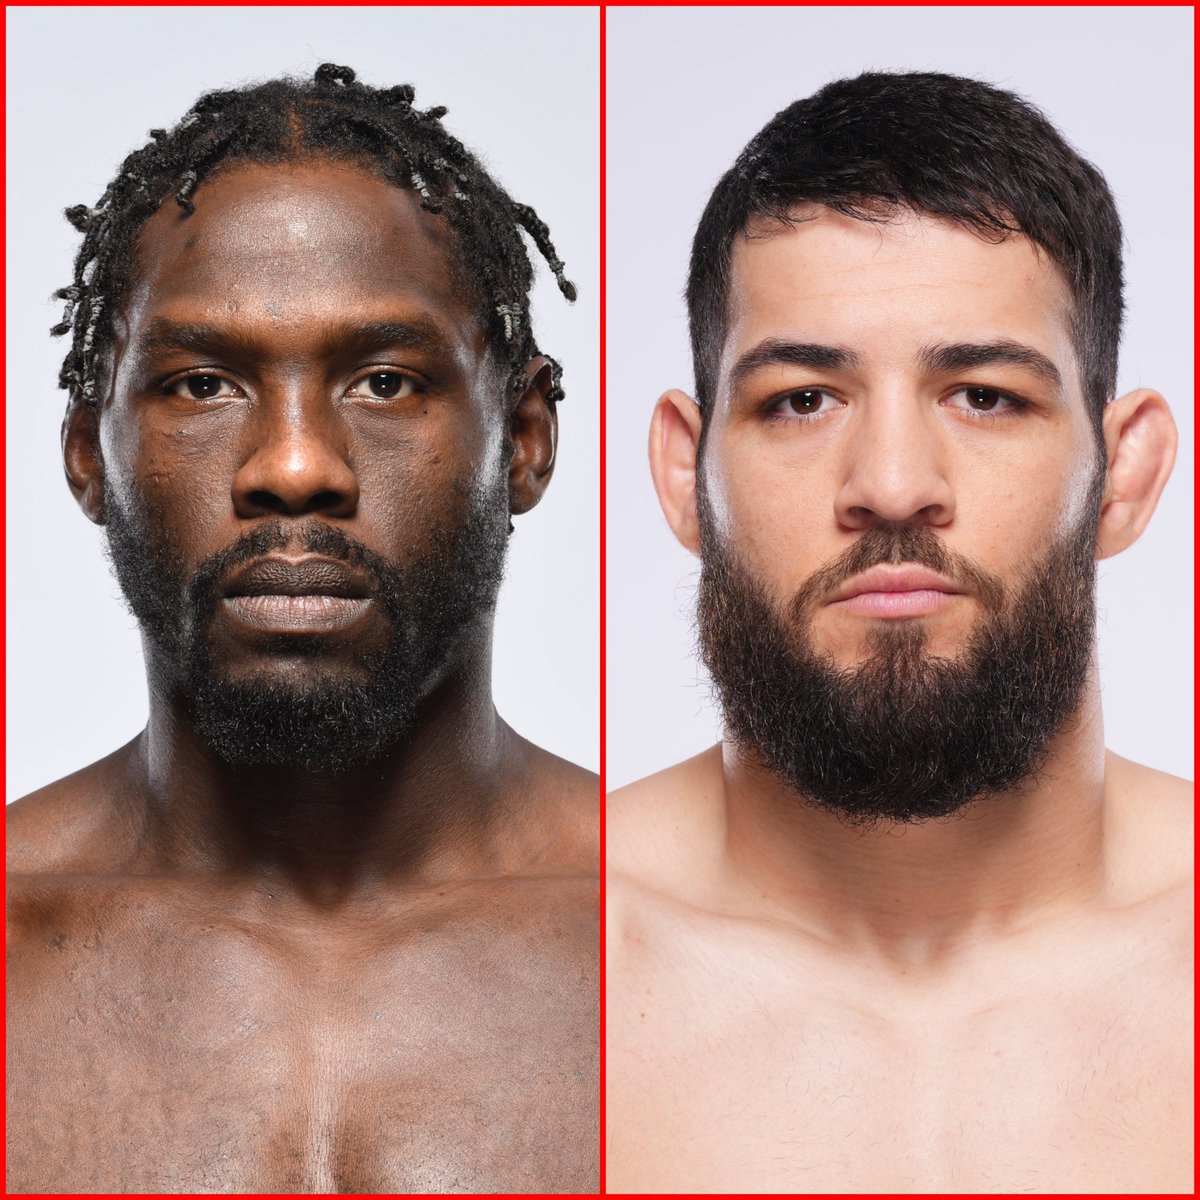 #UFCLouisville has its main event!

No. 4 Ranked middleweight Jared Cannonier will take on No. 8 Nassourdine Imavov, per sources